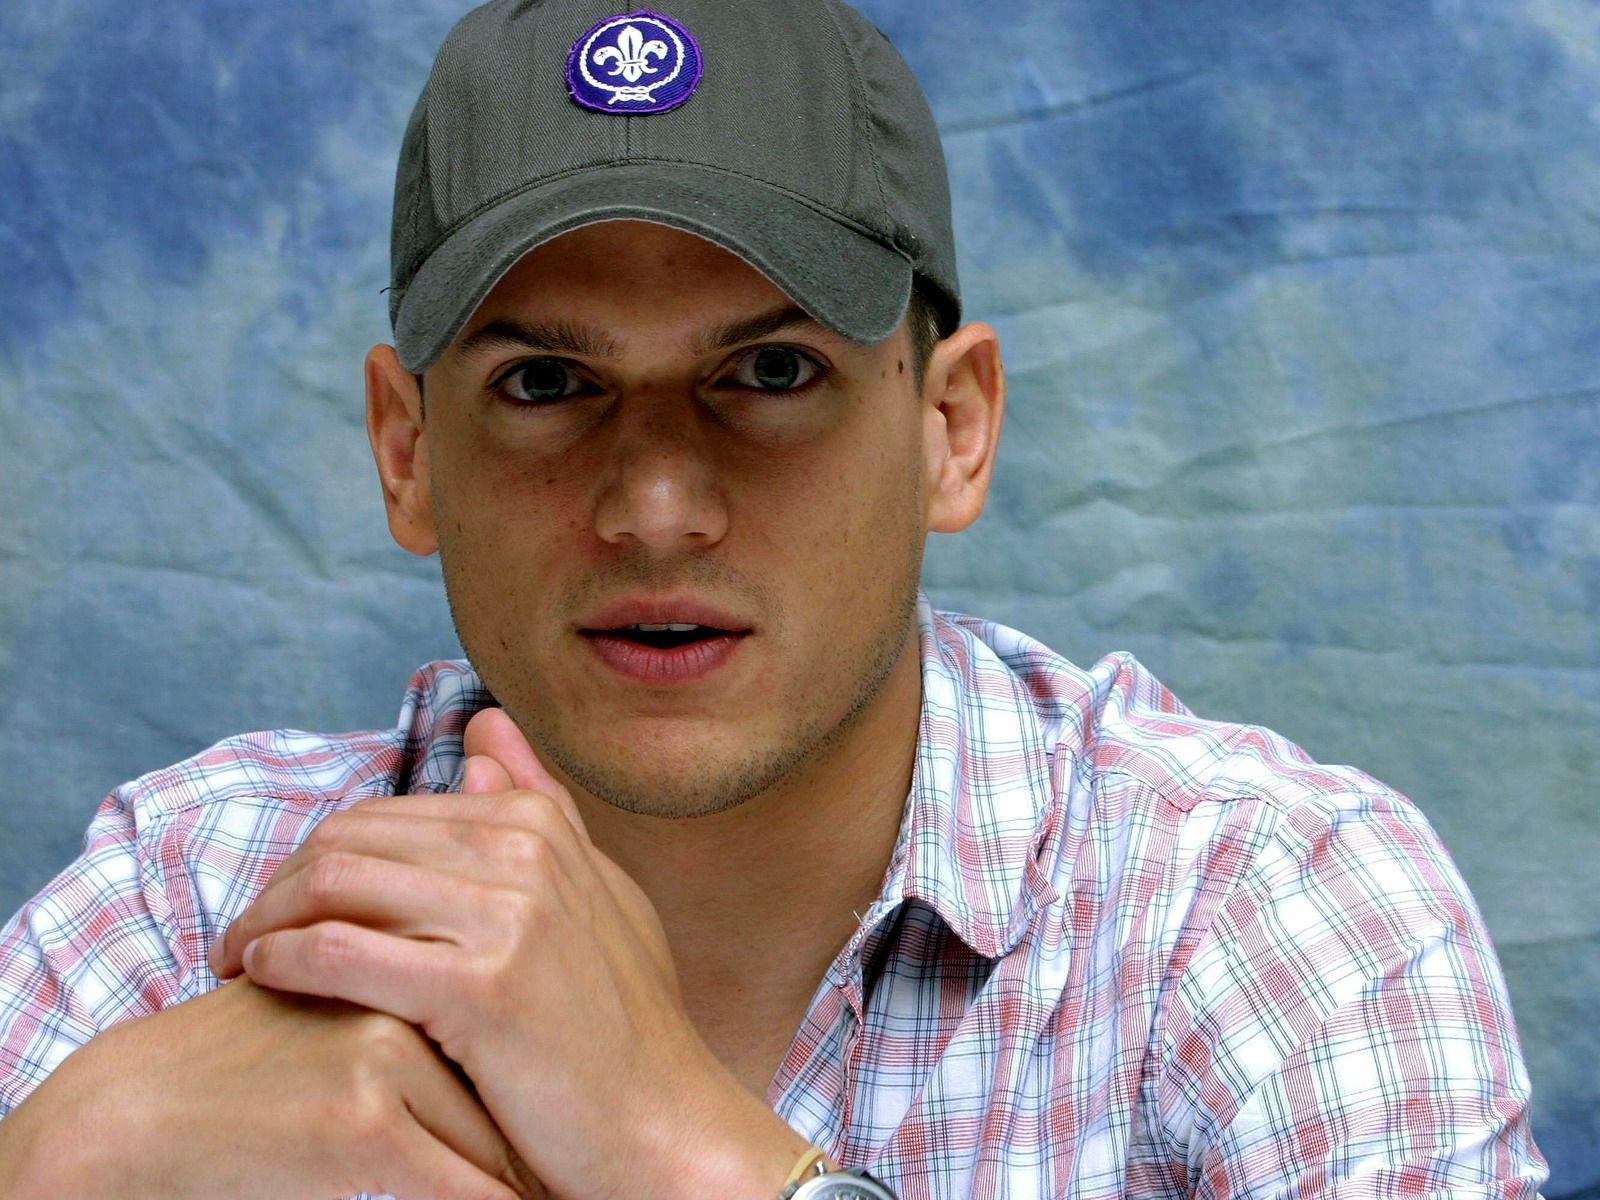 Wentworth Miller Wallpapers - Wallpaper Cave